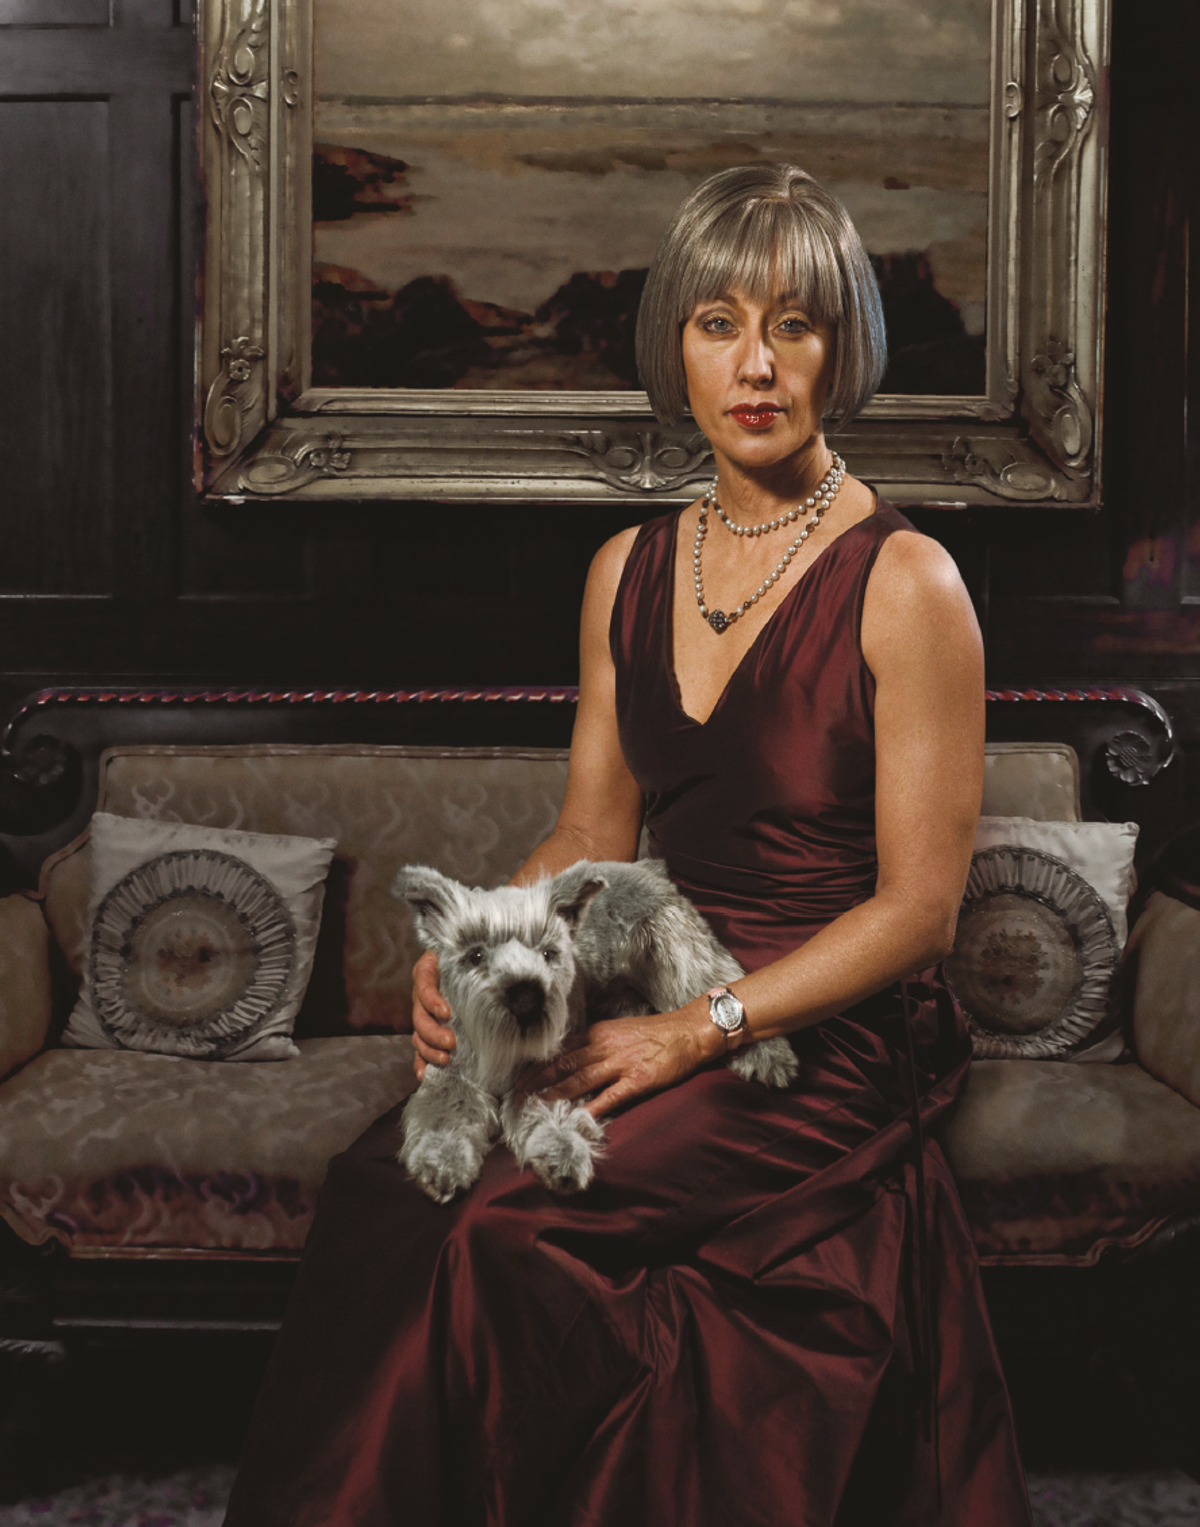 The thousand faces of Cindy Sherman shown in London